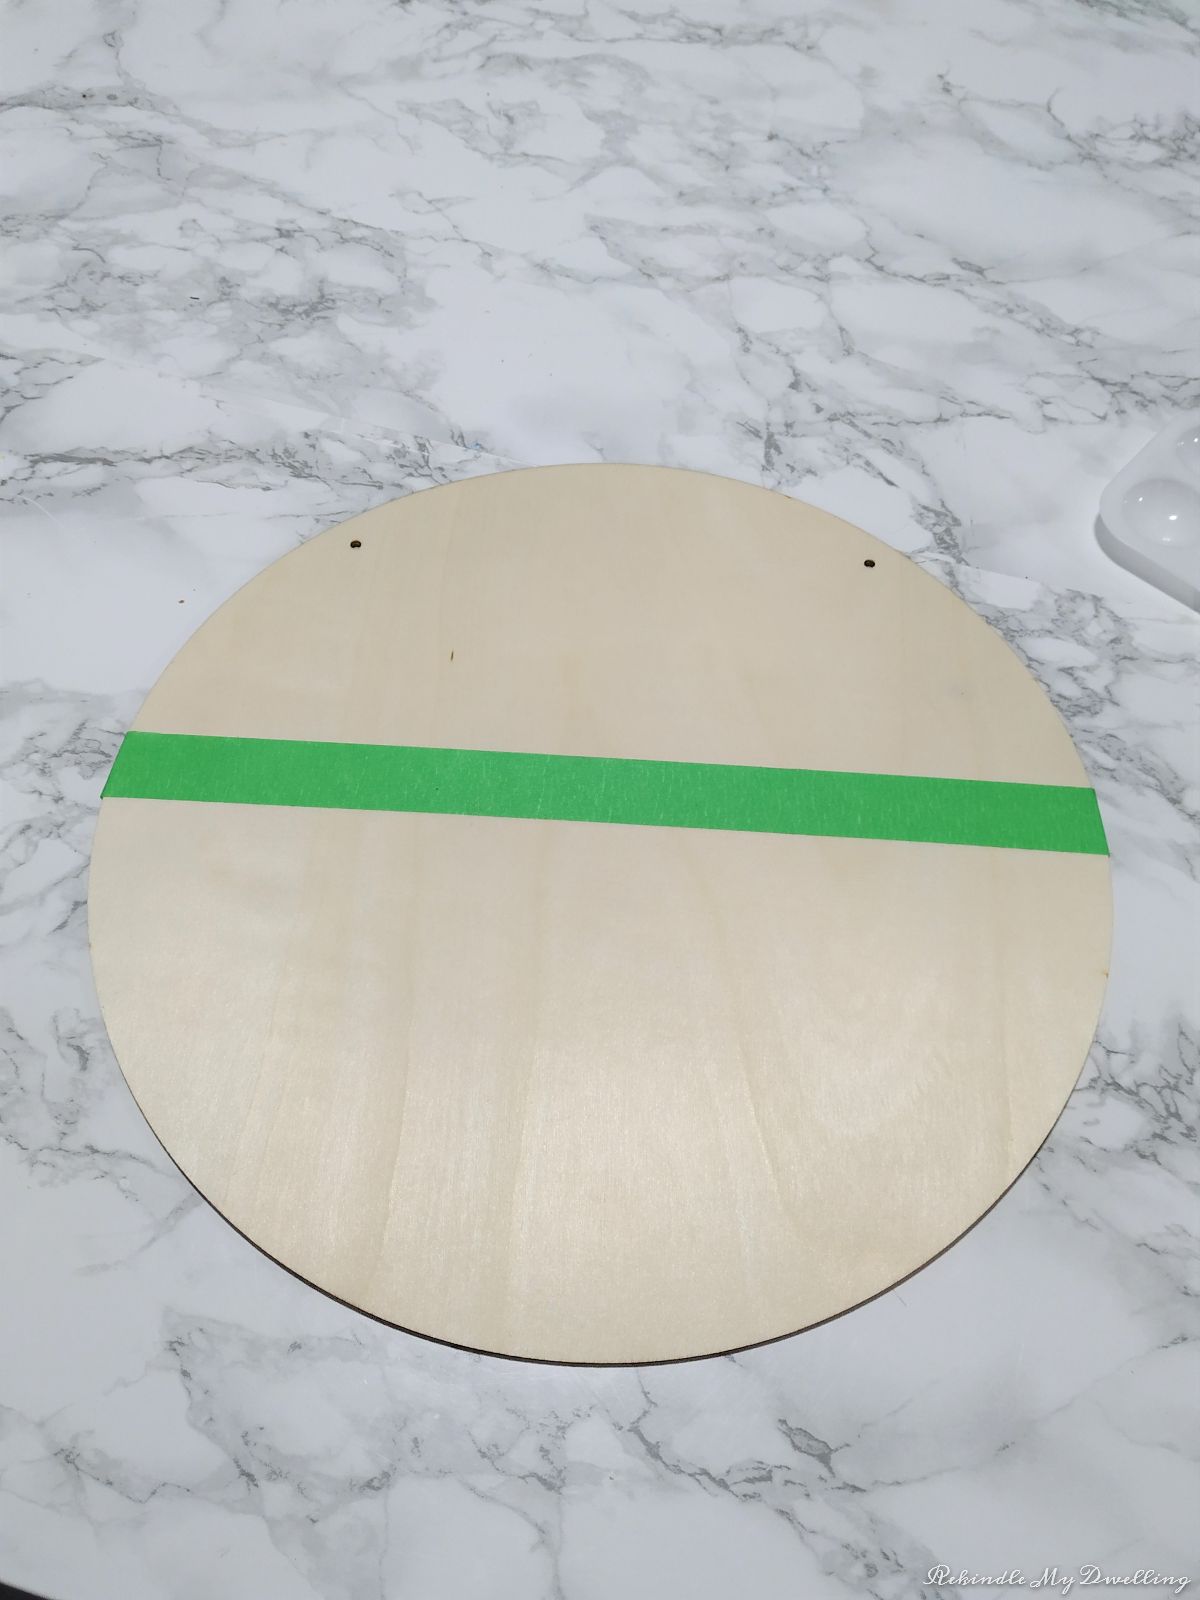 Adding green painters tape to the middle of the wood circle.